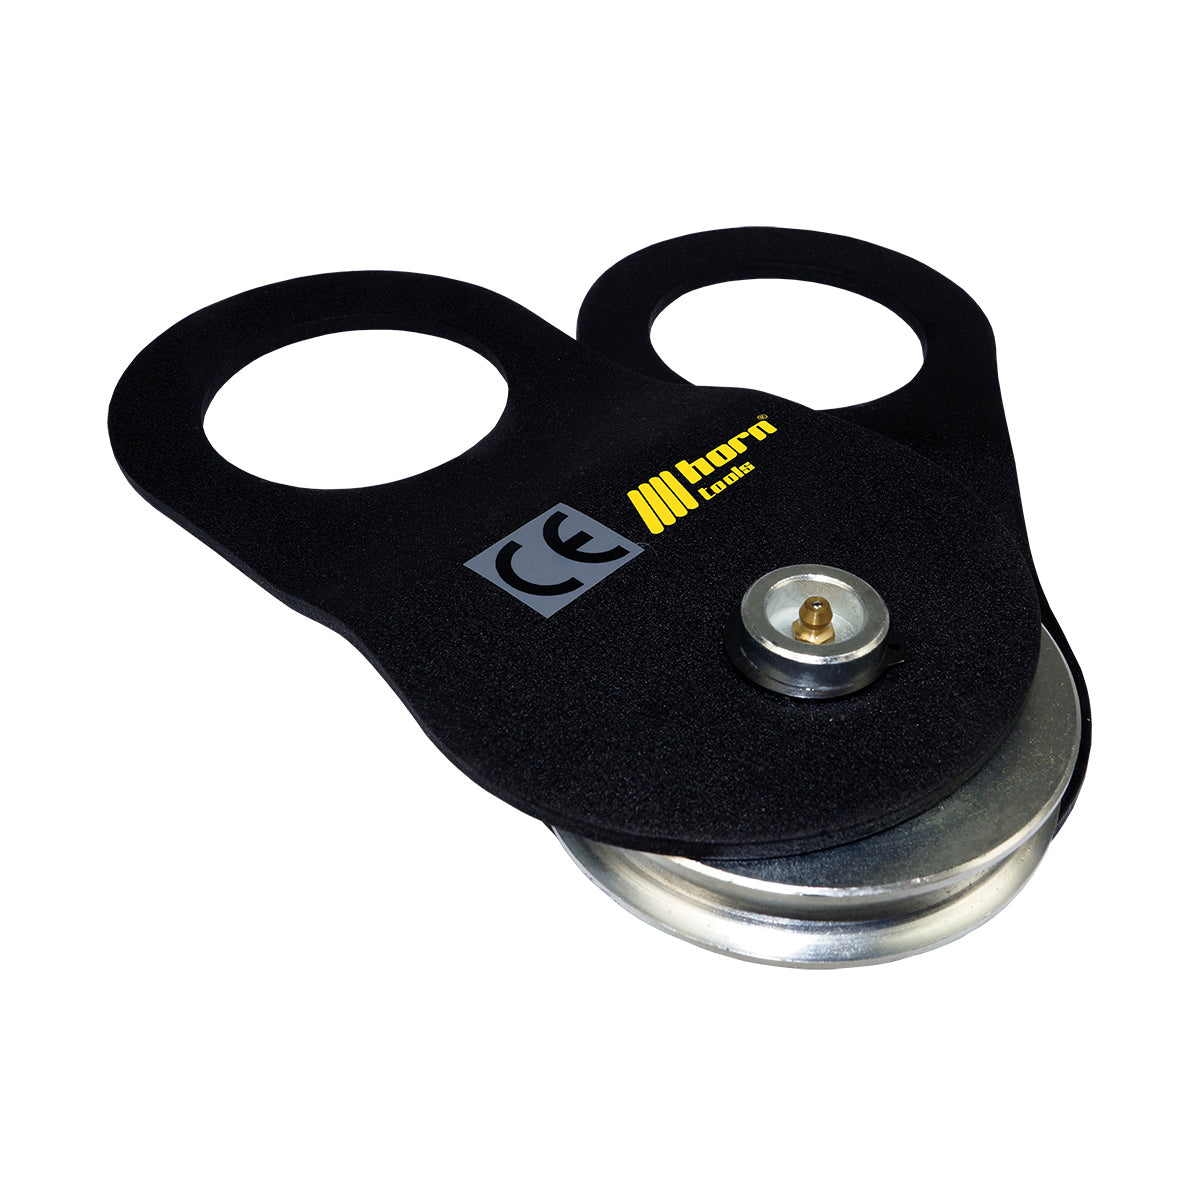 Horntools deflection pulley for electric winches, 9 t breaking load